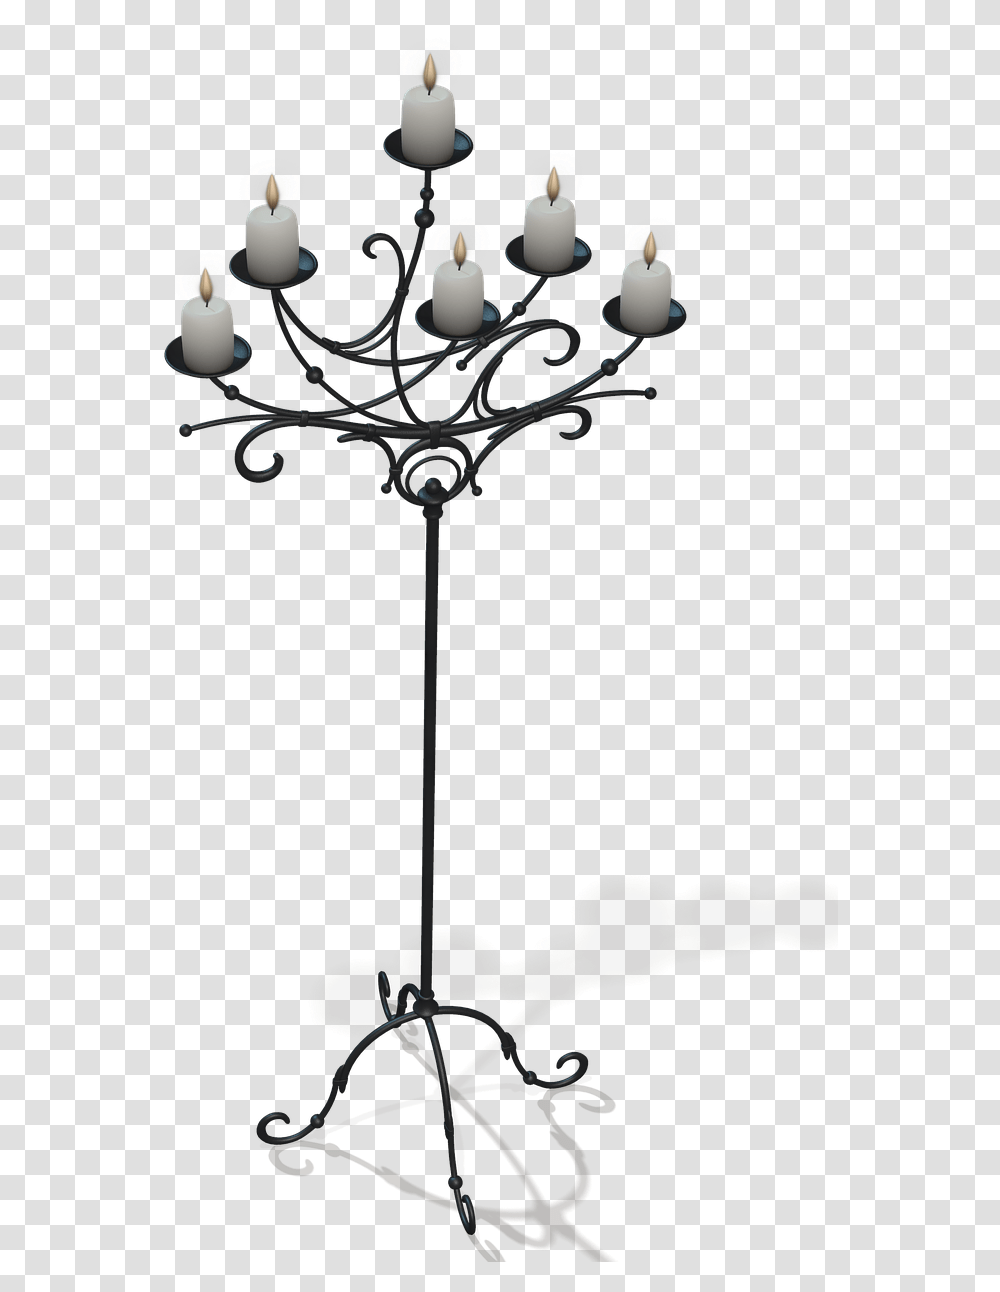 Candles On Stand, Lamp, Chandelier Transparent Png